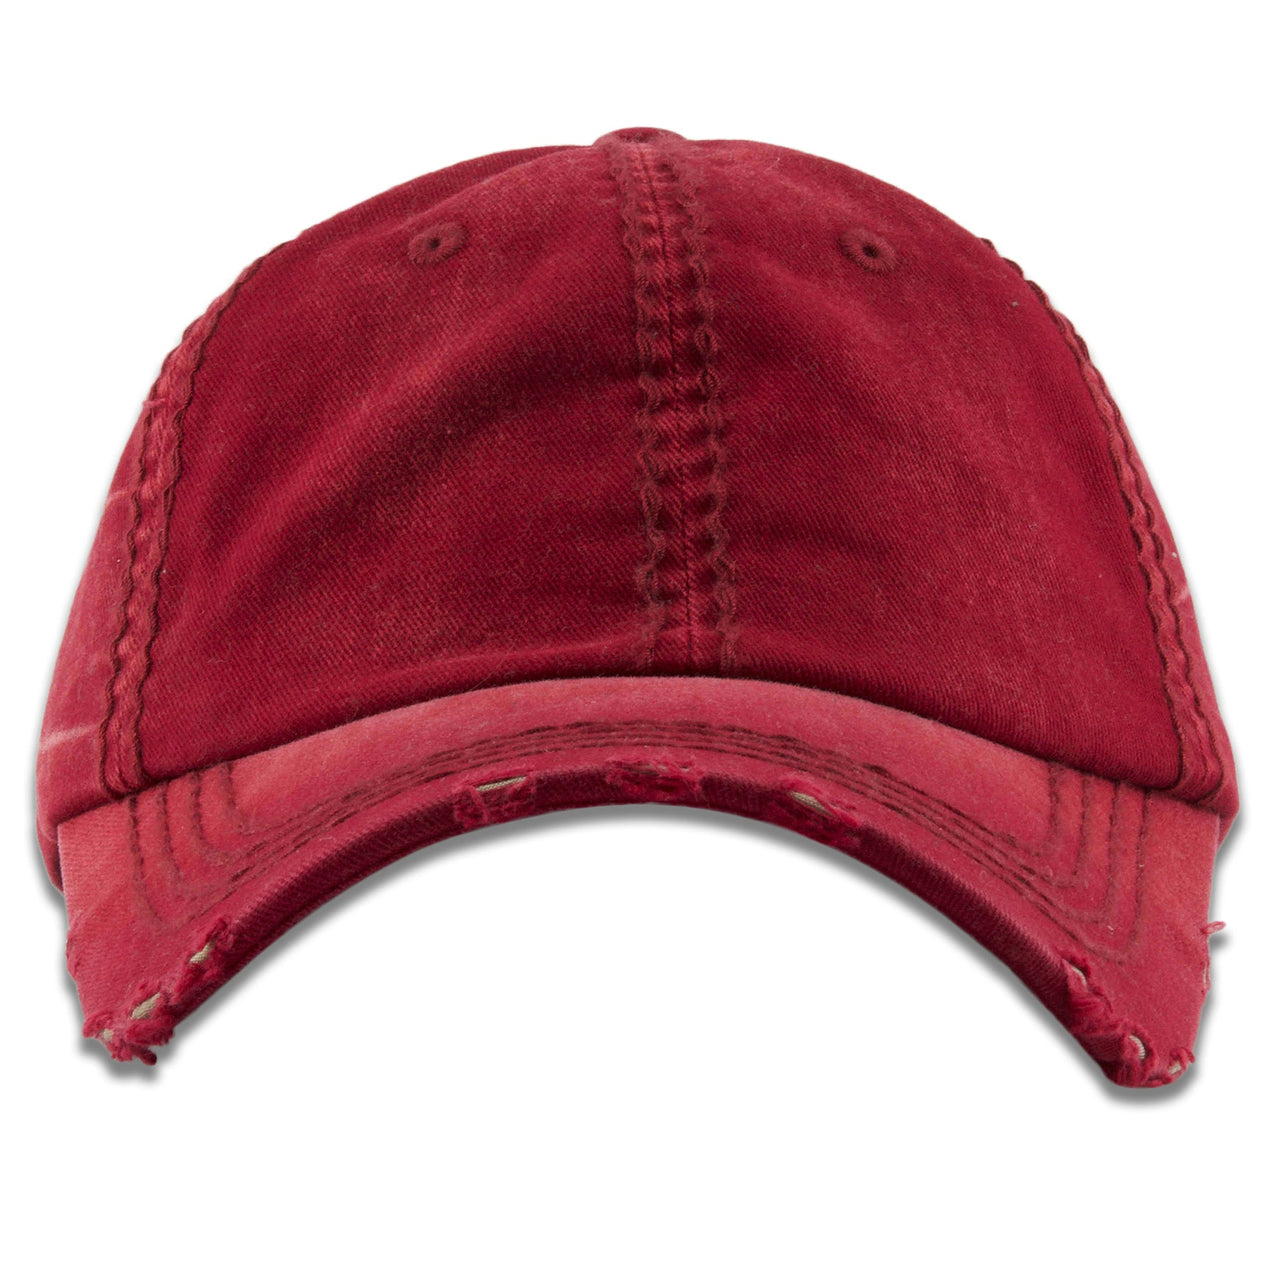 The vintage burgundy blank baseball cap has a soft unstructured crown and a bent brim